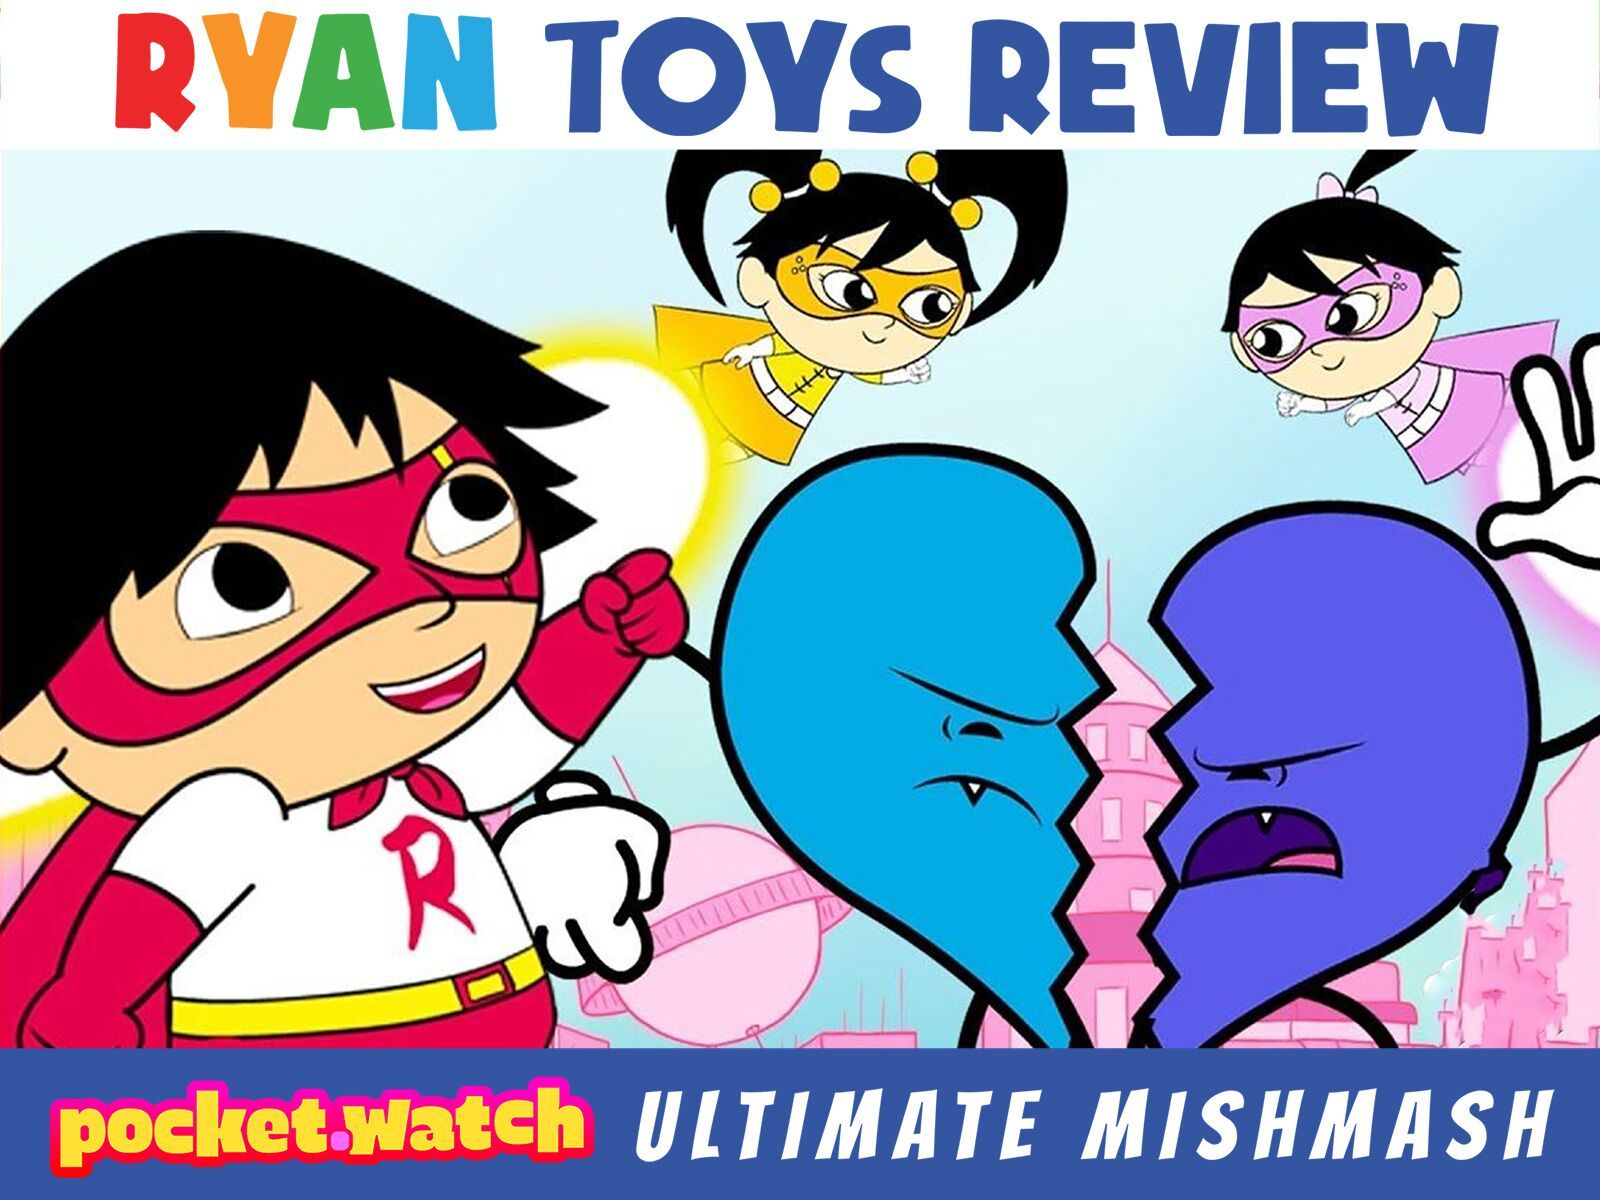 pocket.watch Ryan Toys Review Ultimate mishmash (TV Series 2018– )